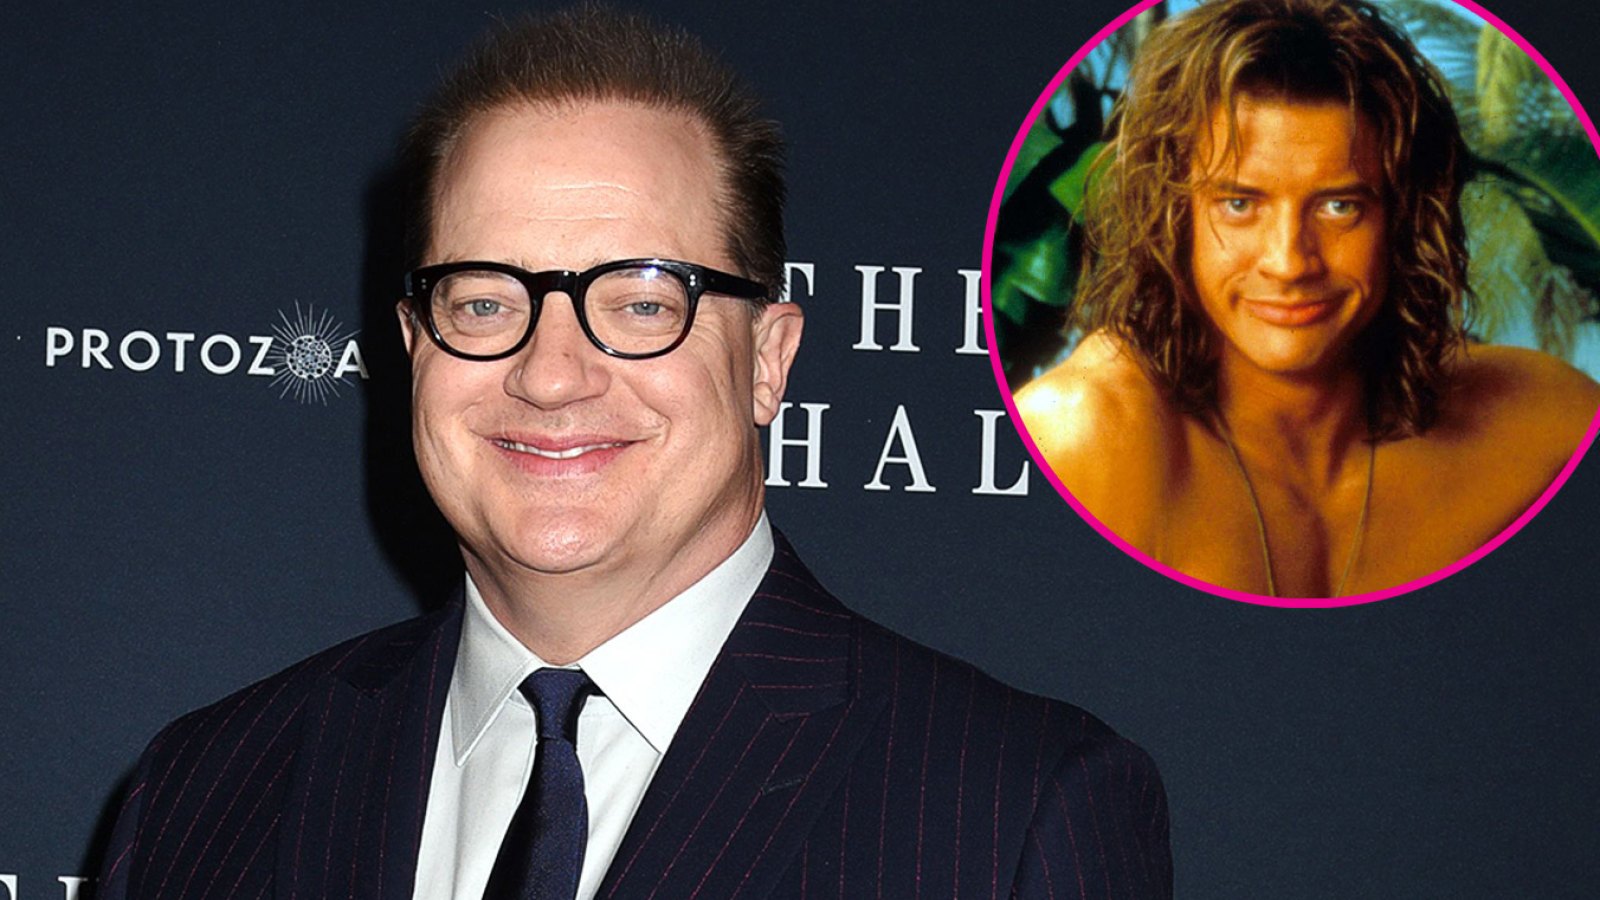 Brendan Fraser Reveals He Starved Himself While Filming 'George of the Jungle'- 'My Brain Was Misfiring' 750